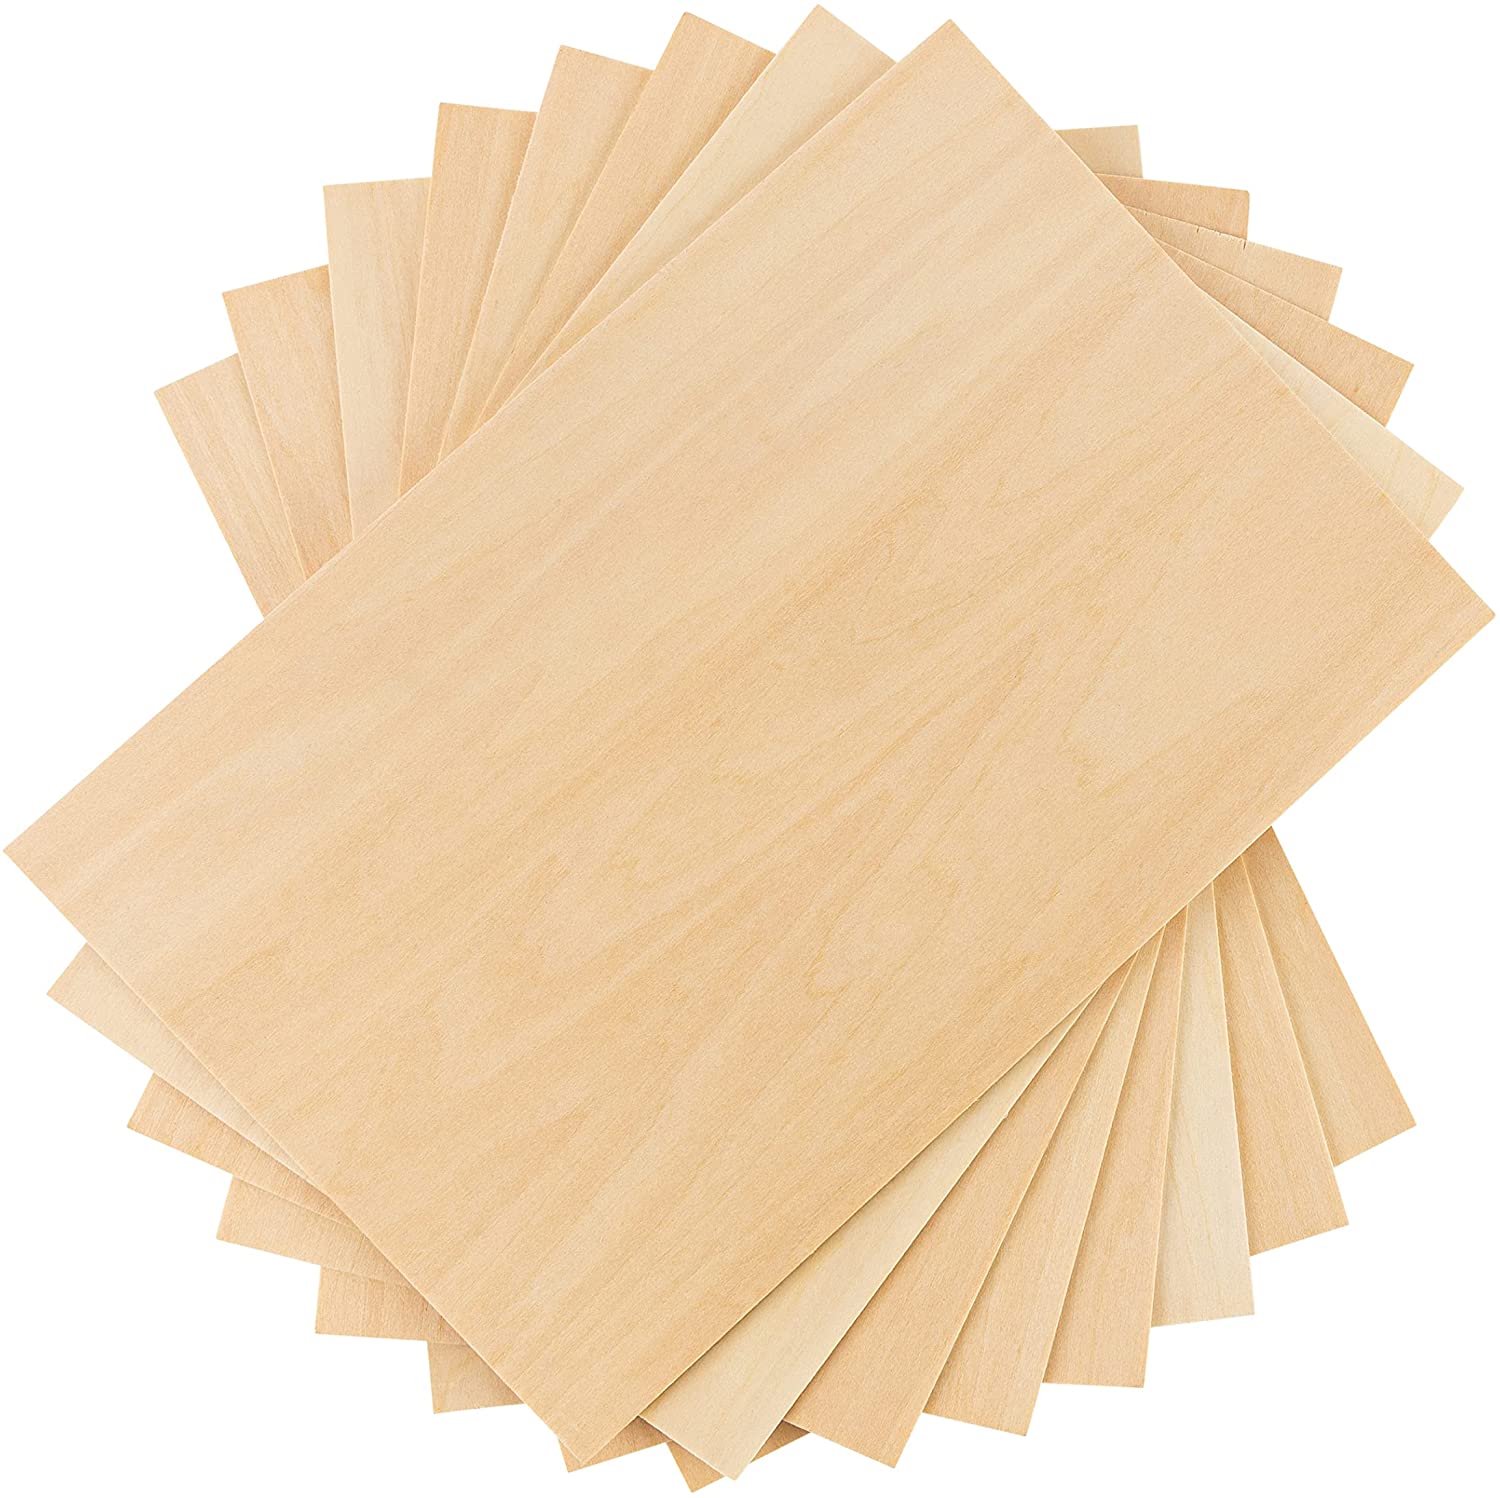 12 Pack Basswood Sheets 12 x 8 x 1/13 Inch Thin Plywood Wood 12 x 8 inch